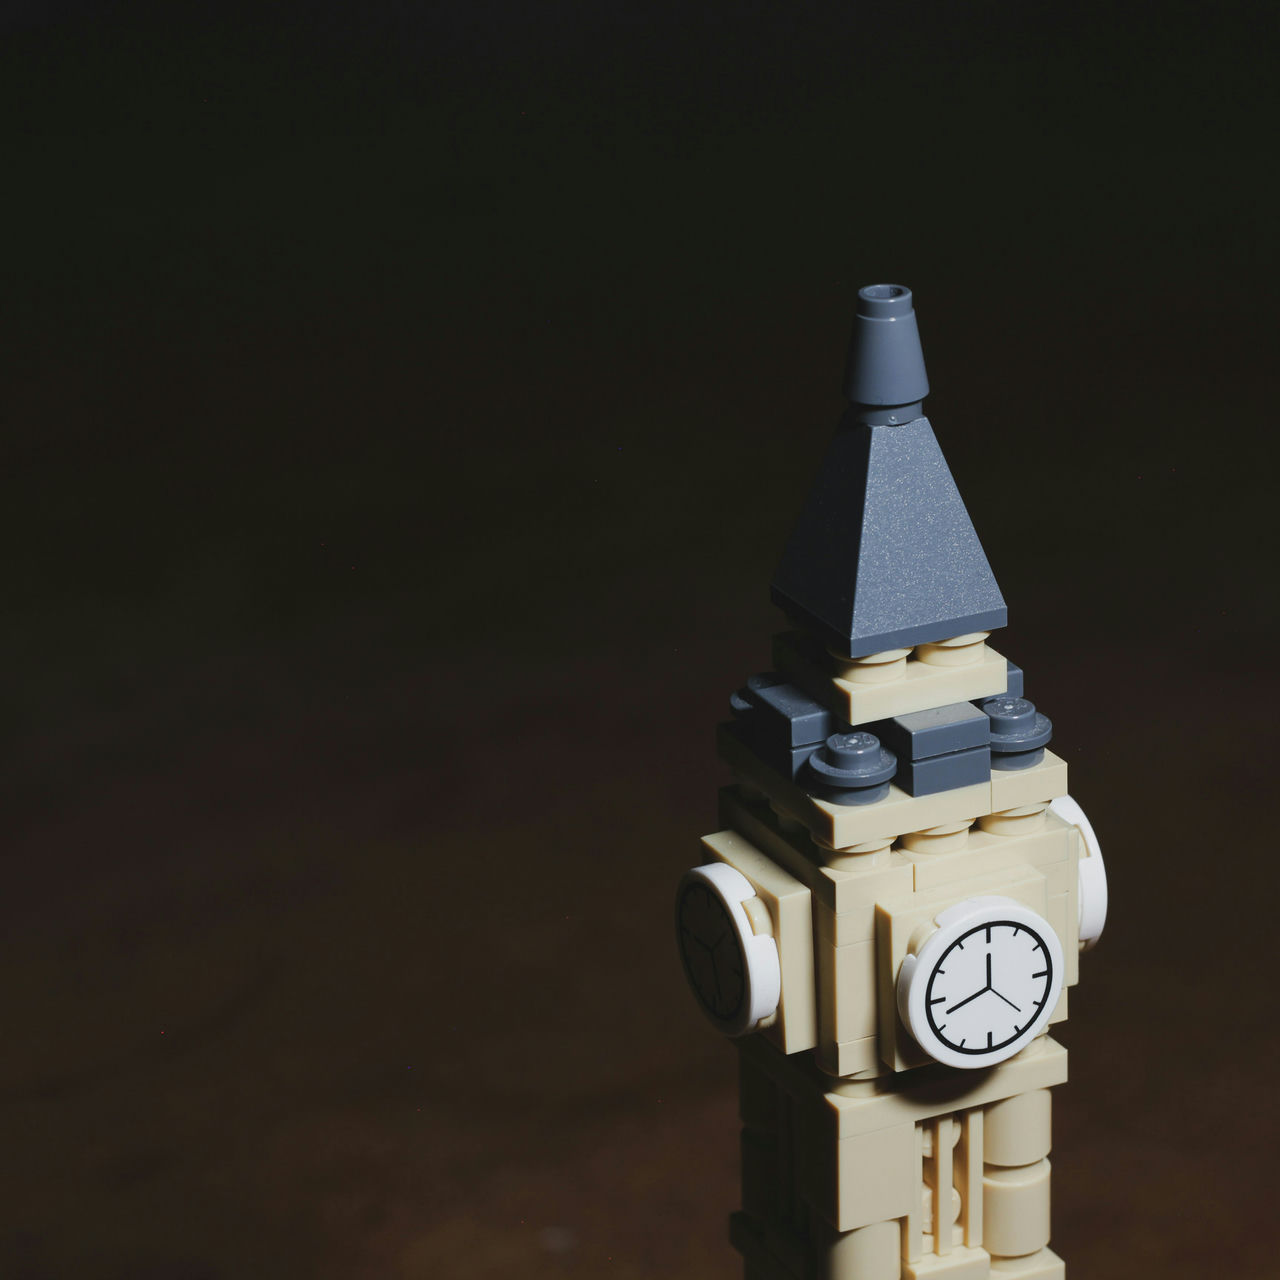 A not-so-big ben made out of lego